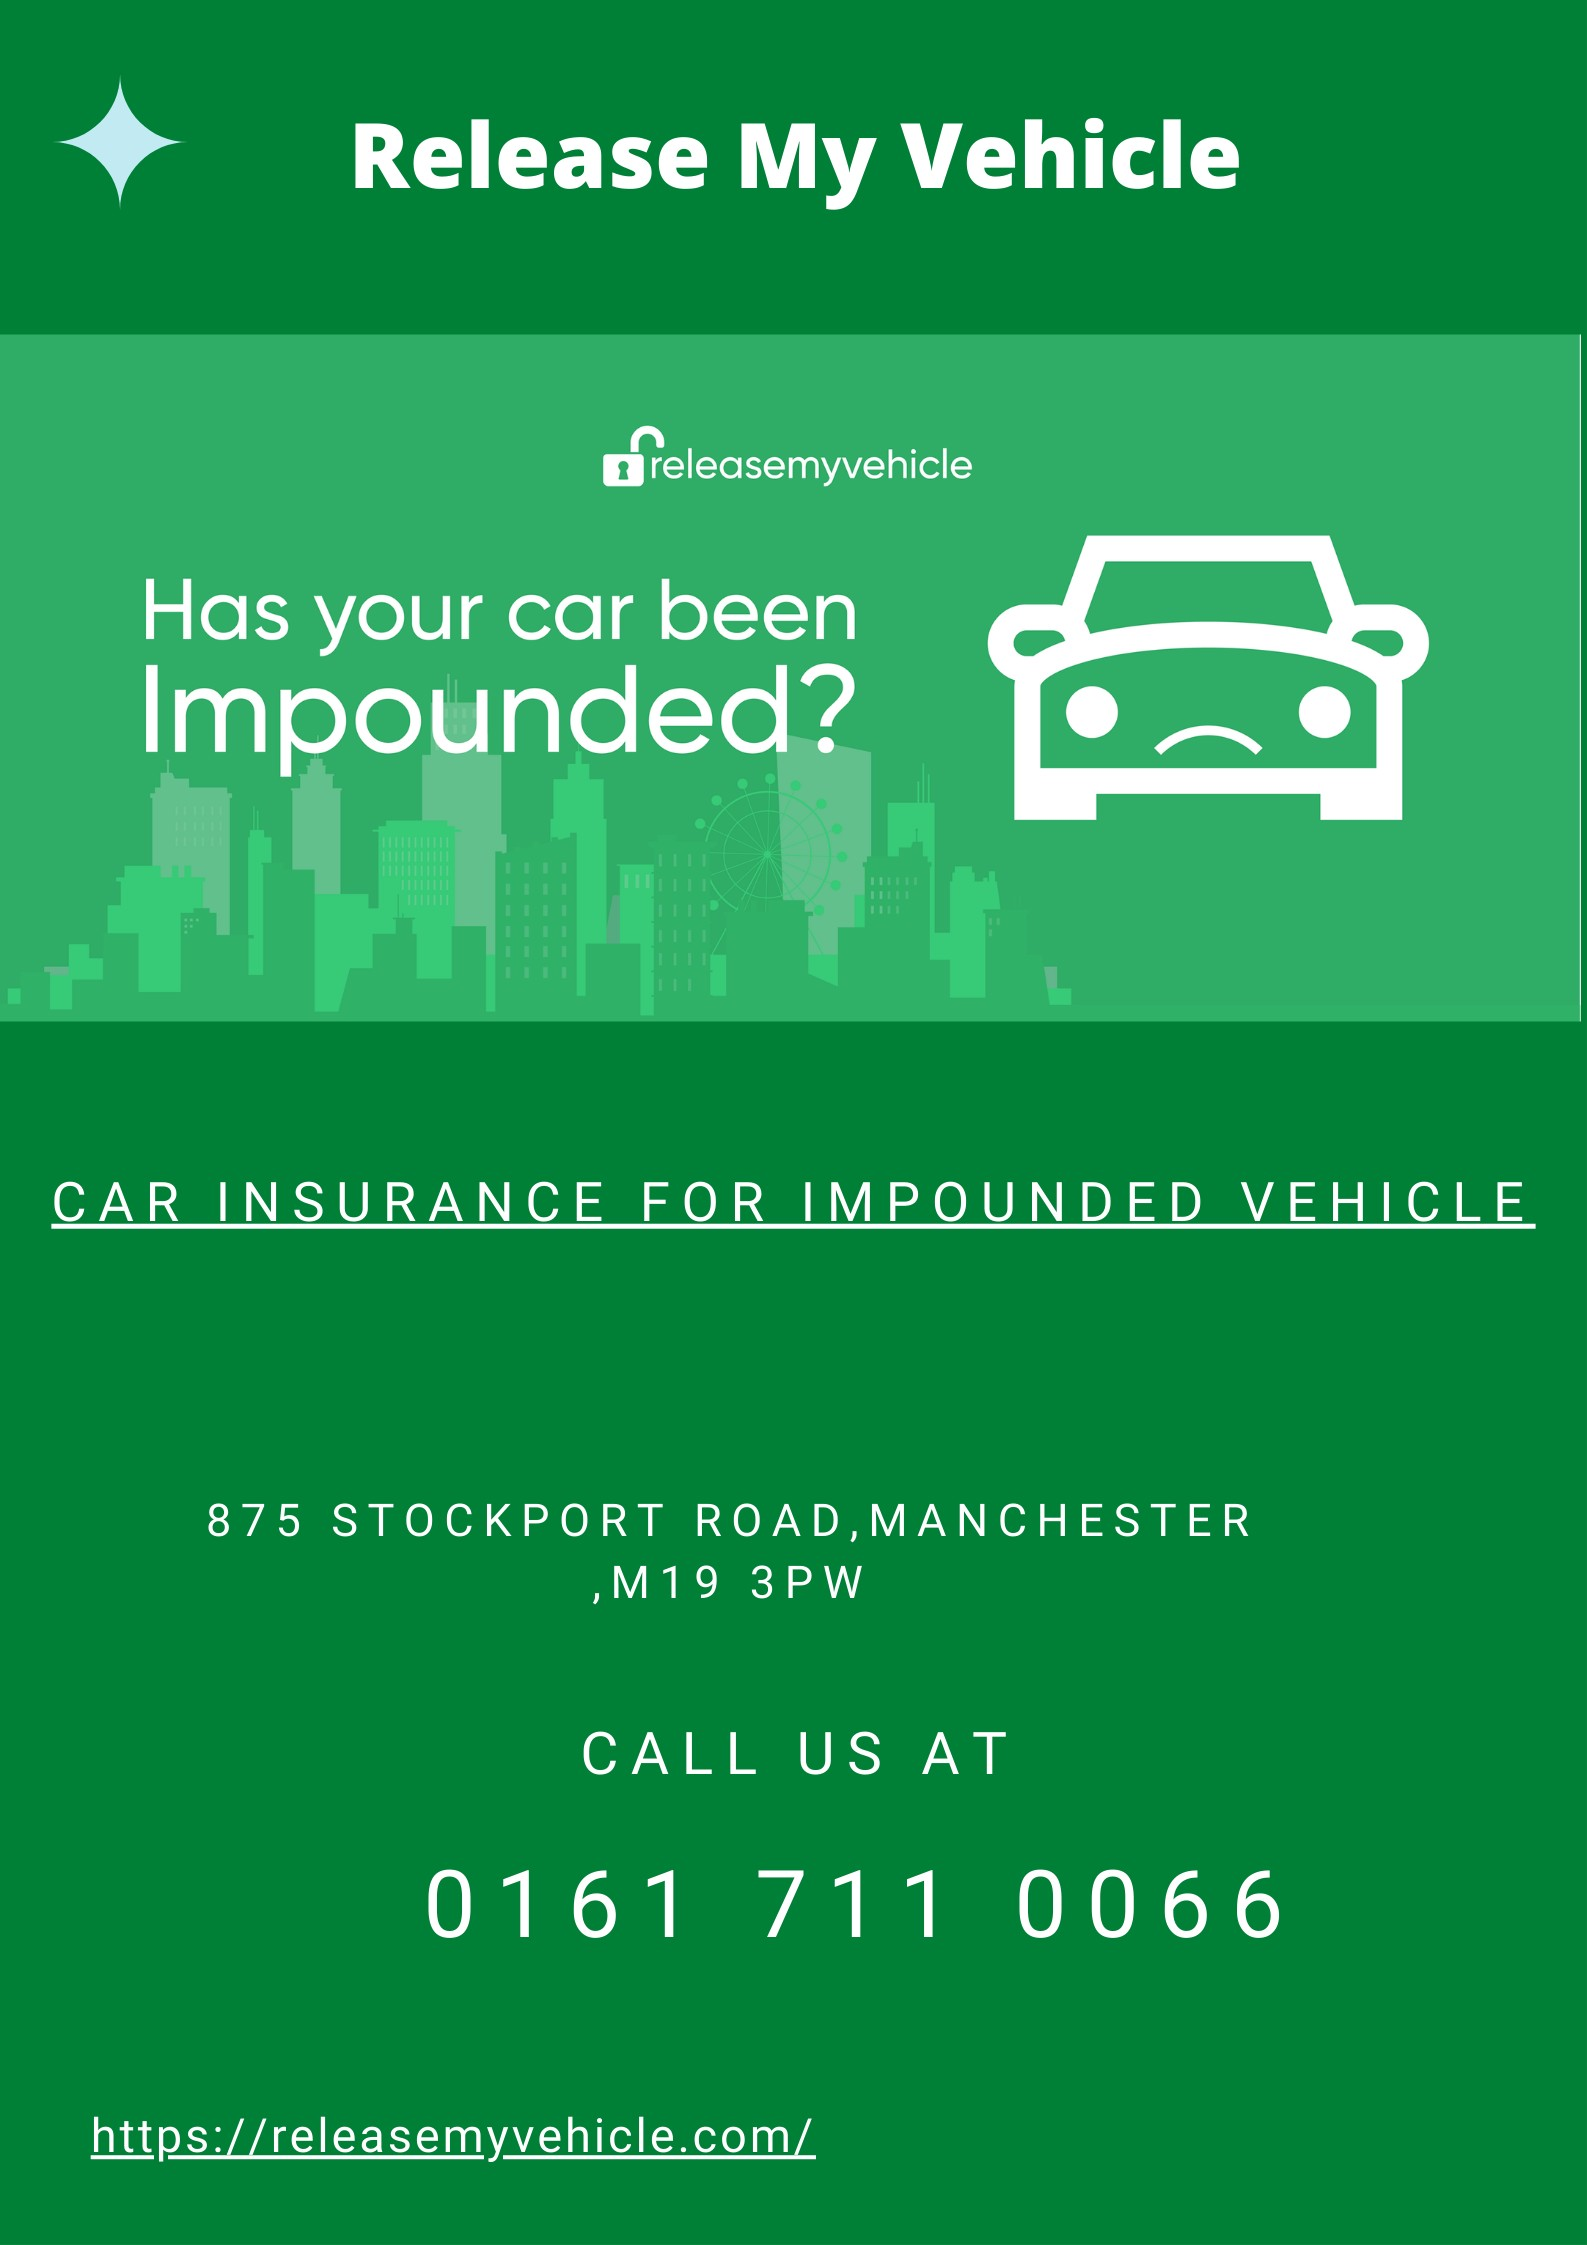 Car insurance for impounded vehicle| Release My Vehicle